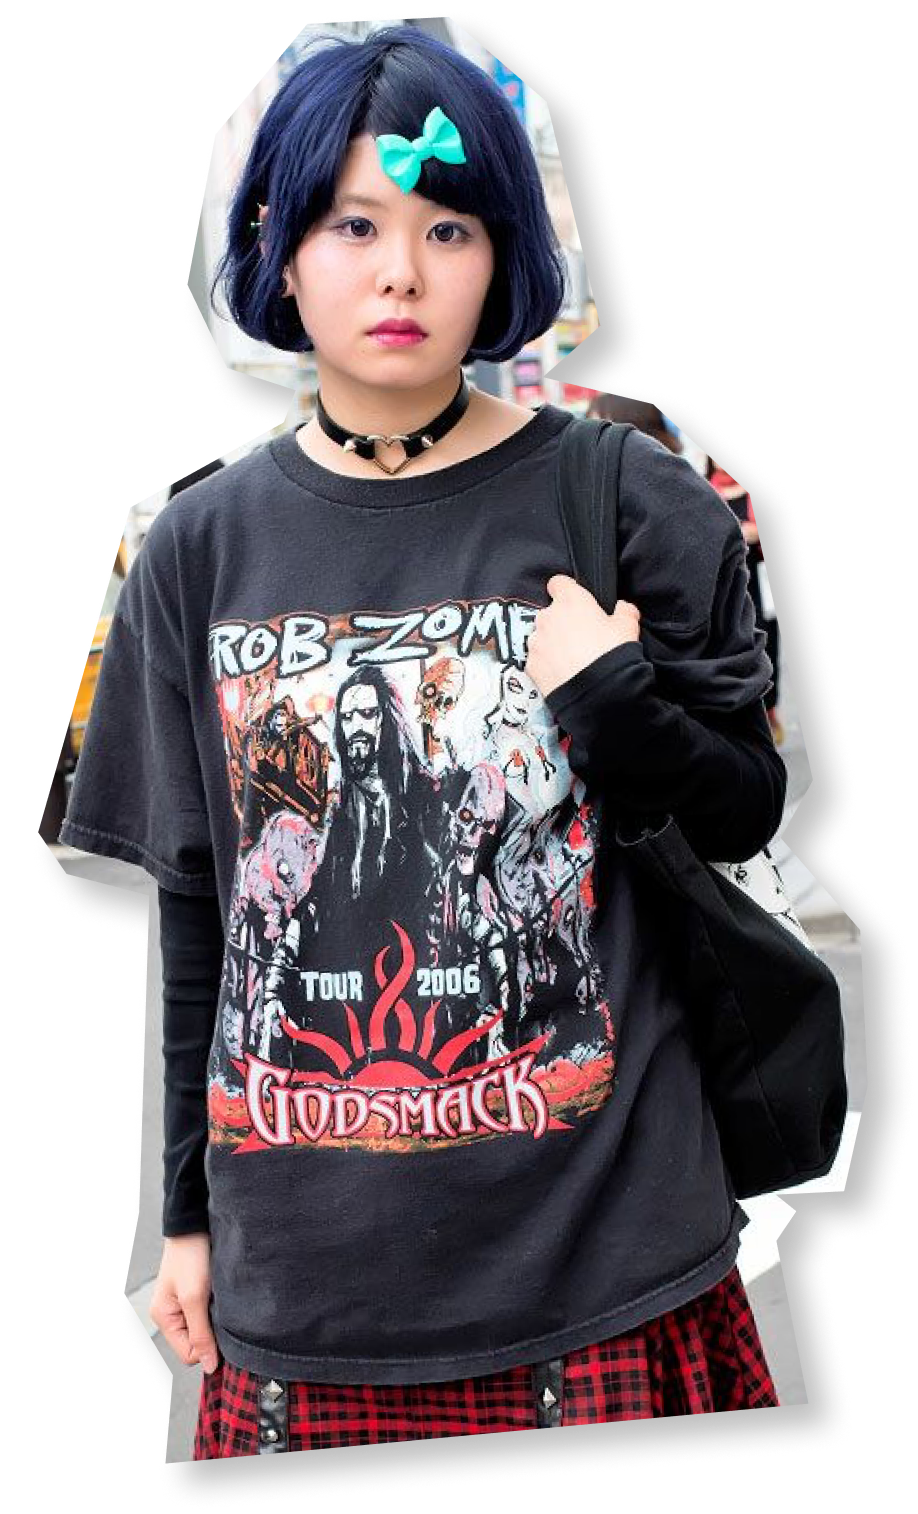 A young Asian woman with a short bob, bow, choker, and Rob Zombie t-shirt.